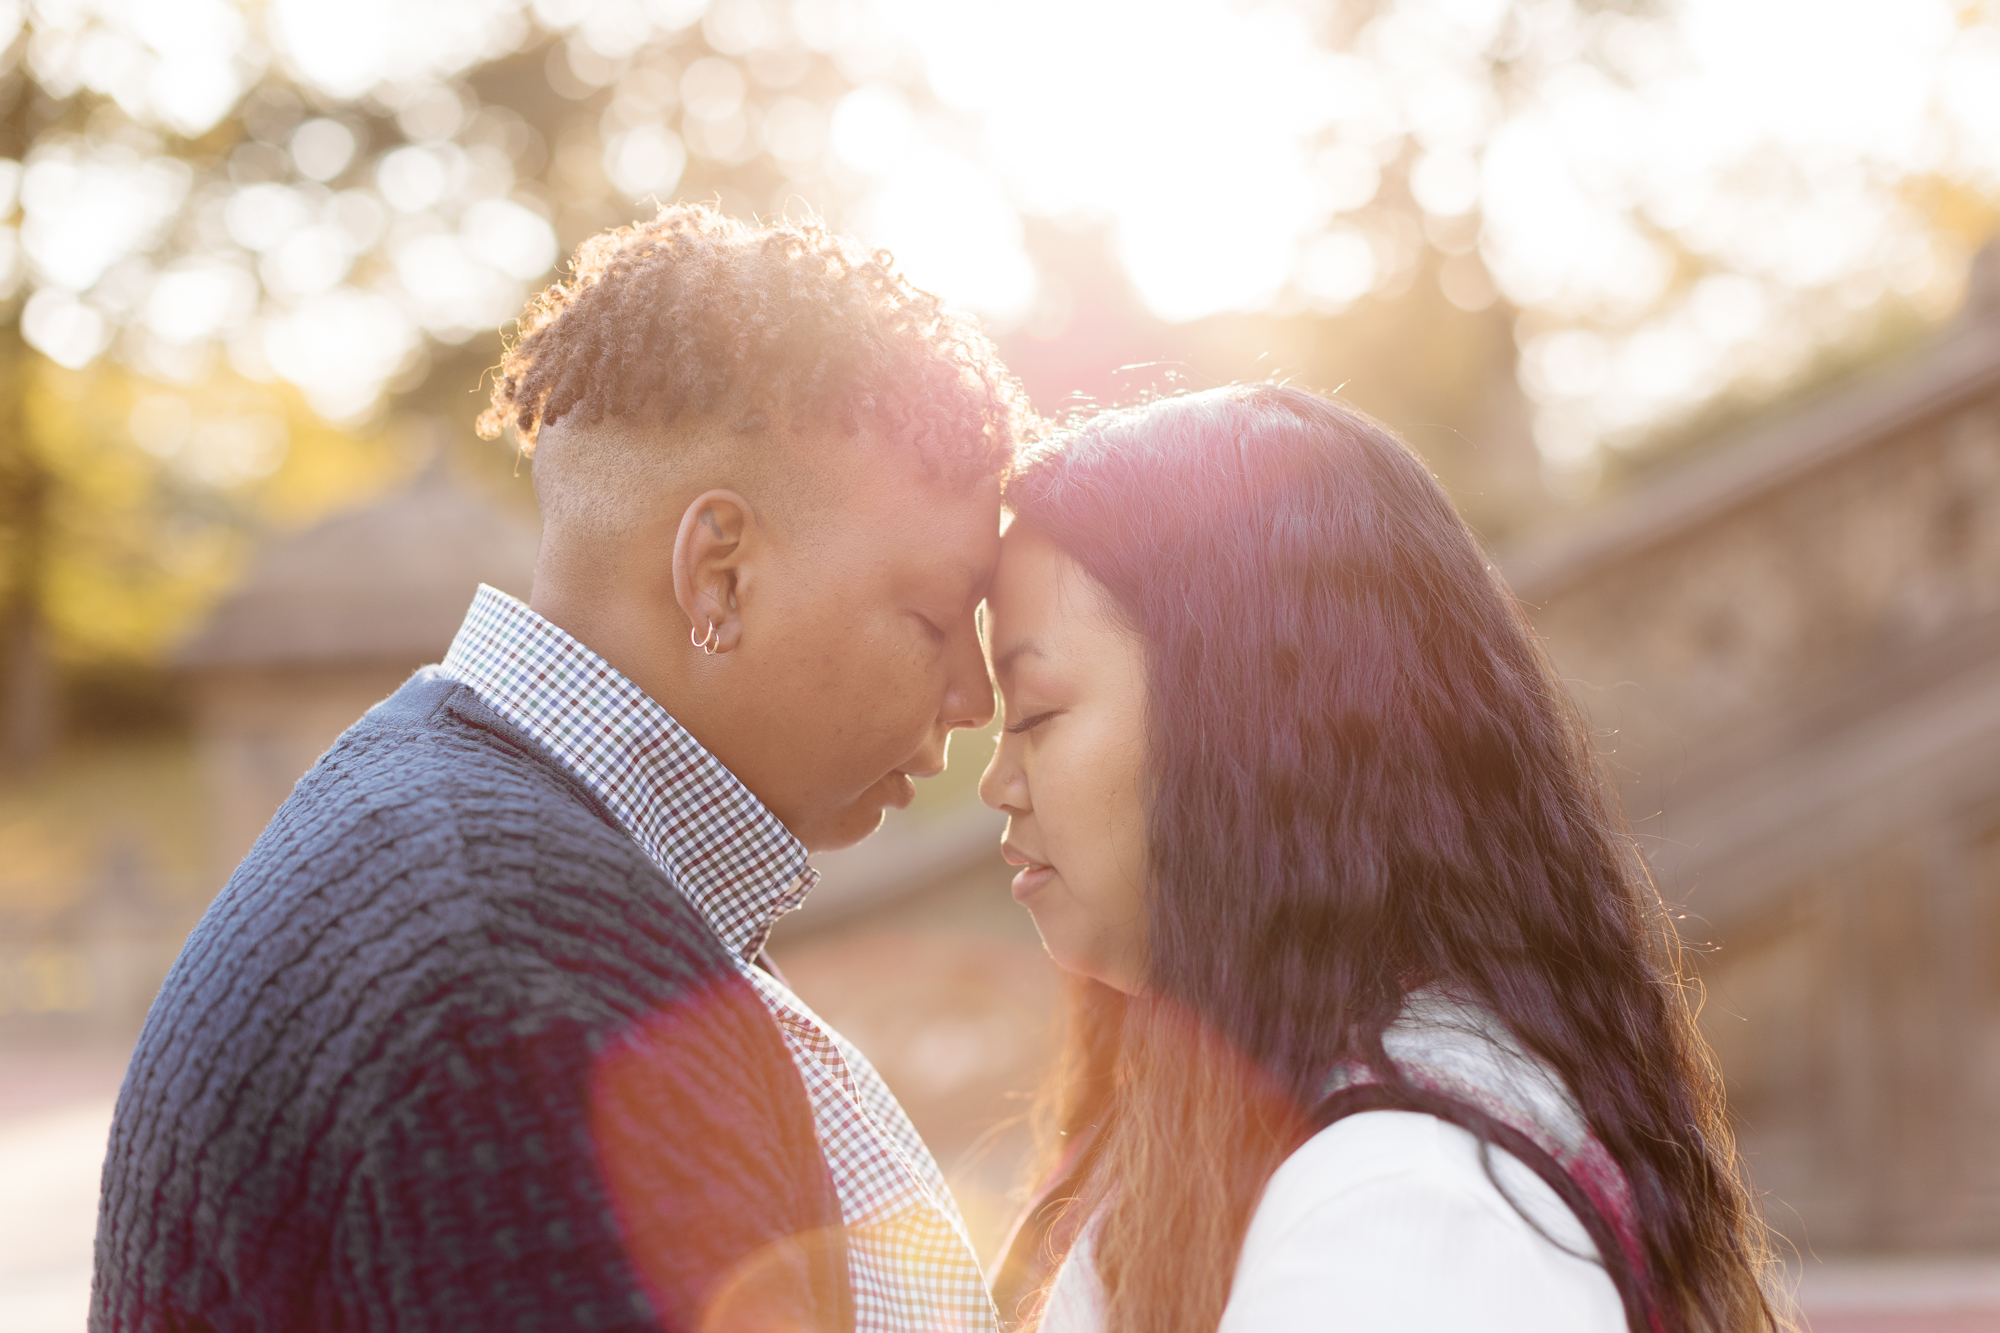 Glowing Central Park Engagement Photos in Autumn at Sunrise